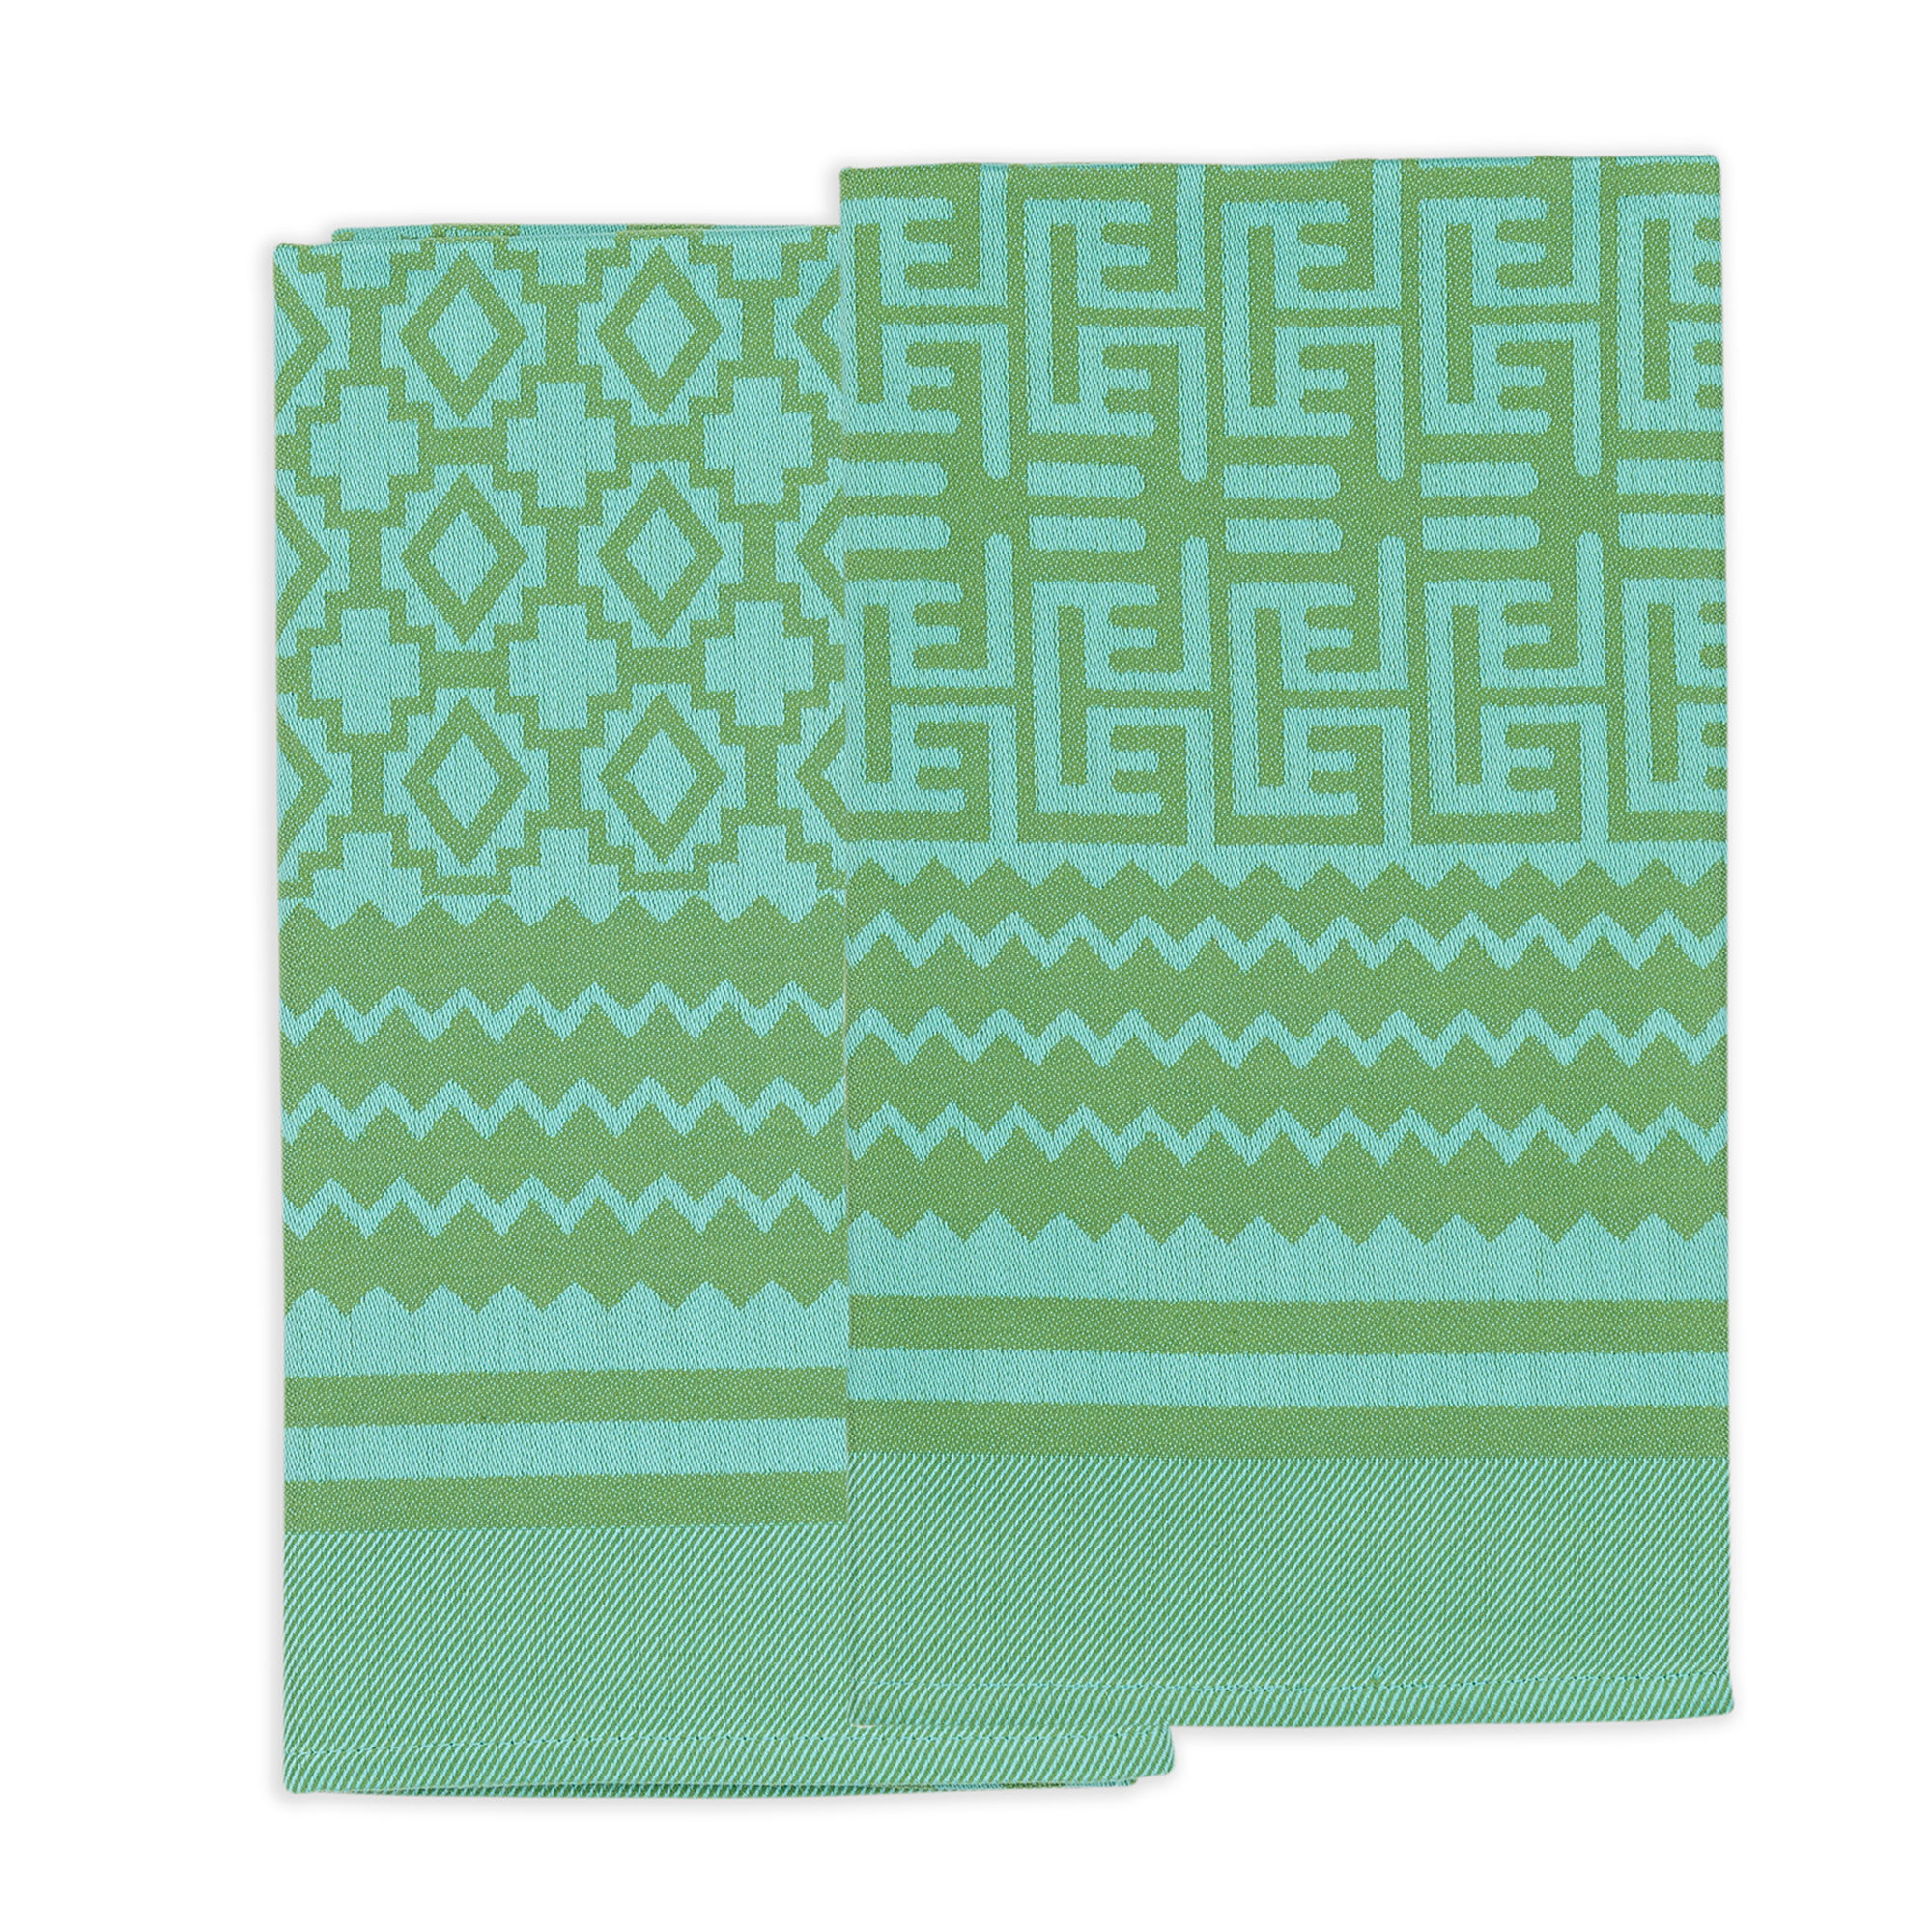 Unique tea towels inspired by Africa's rich culture, jacquard woven from 100% African cotton. Featuring diverse African patterns including geometric designs in light and dark green, these dish towels add vibrancy to your kitchen and intrigue guests.